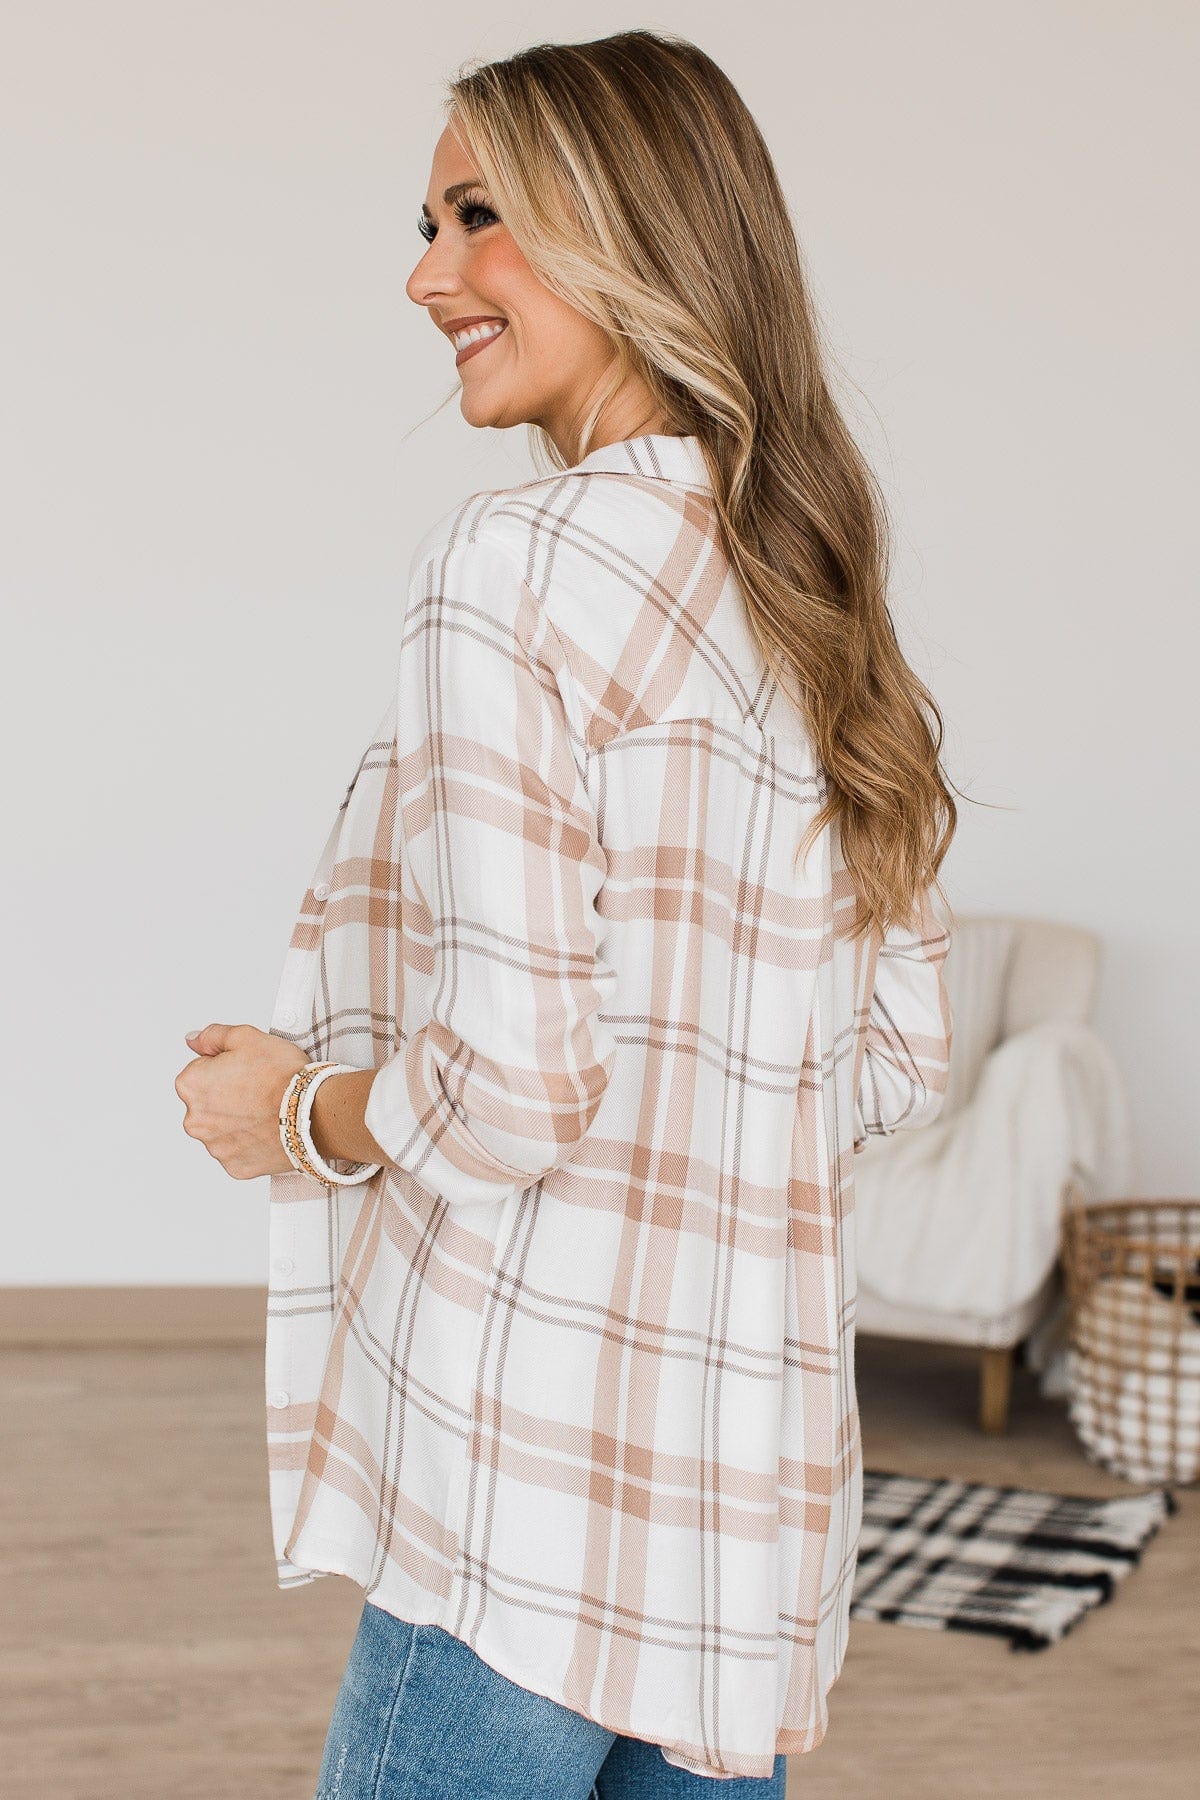 Thread & Supply Can't Stop Me Now Plaid Top- Ivory & Beige